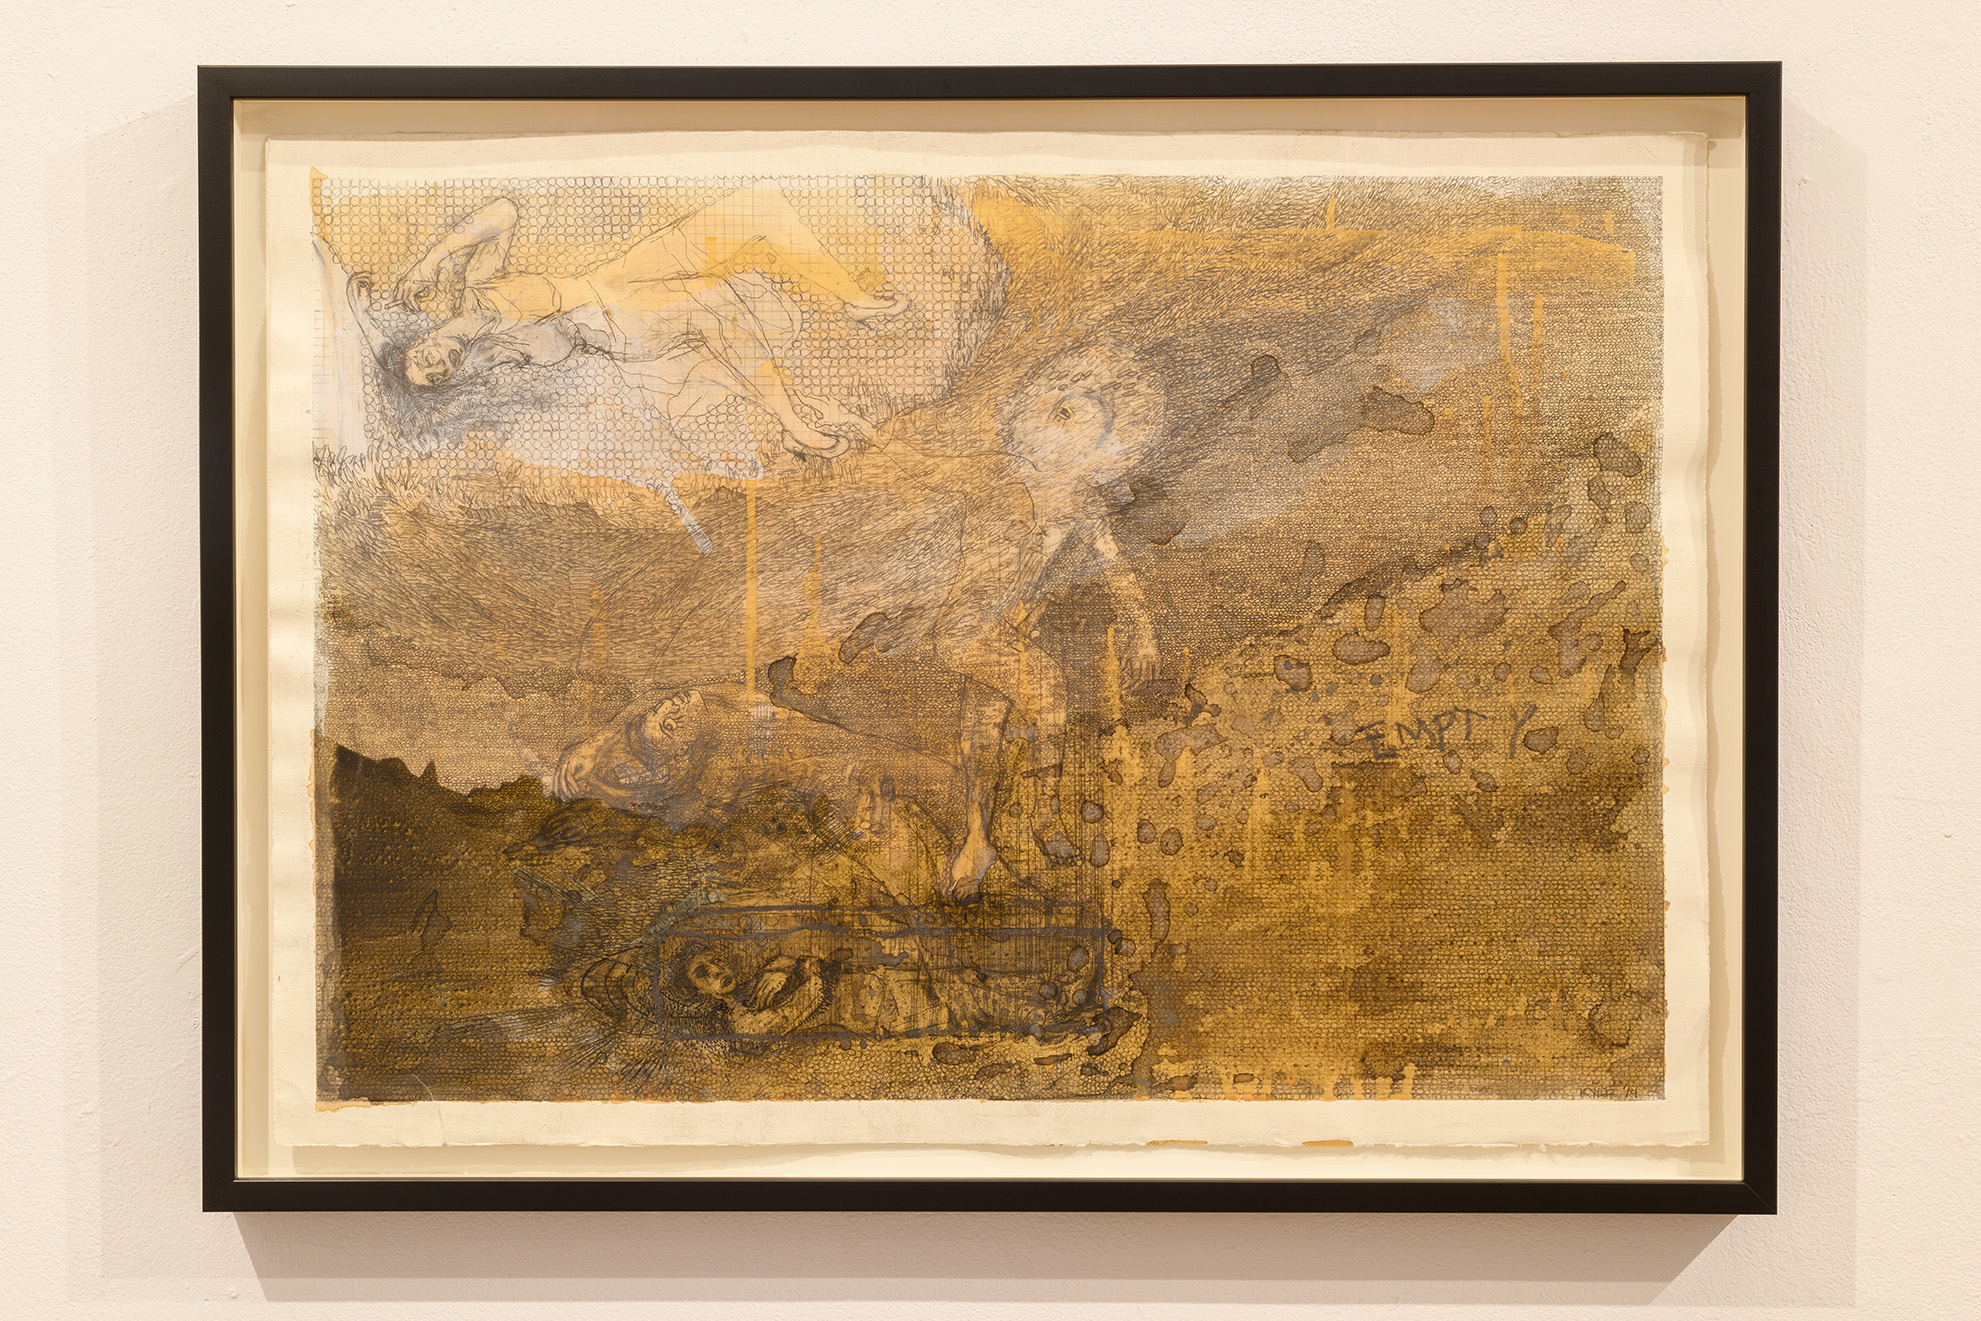 [An artwork rendered in yellows, ocres, browns, and grays framed within a black frame. The artwork’s imagery feels rapturous–human figures move through all parts of the pictureplane’s textural atmosphere, landscape, and underground areas. The people, whether spirits or figures, barely touch yet are very aware of each other’s presences.]